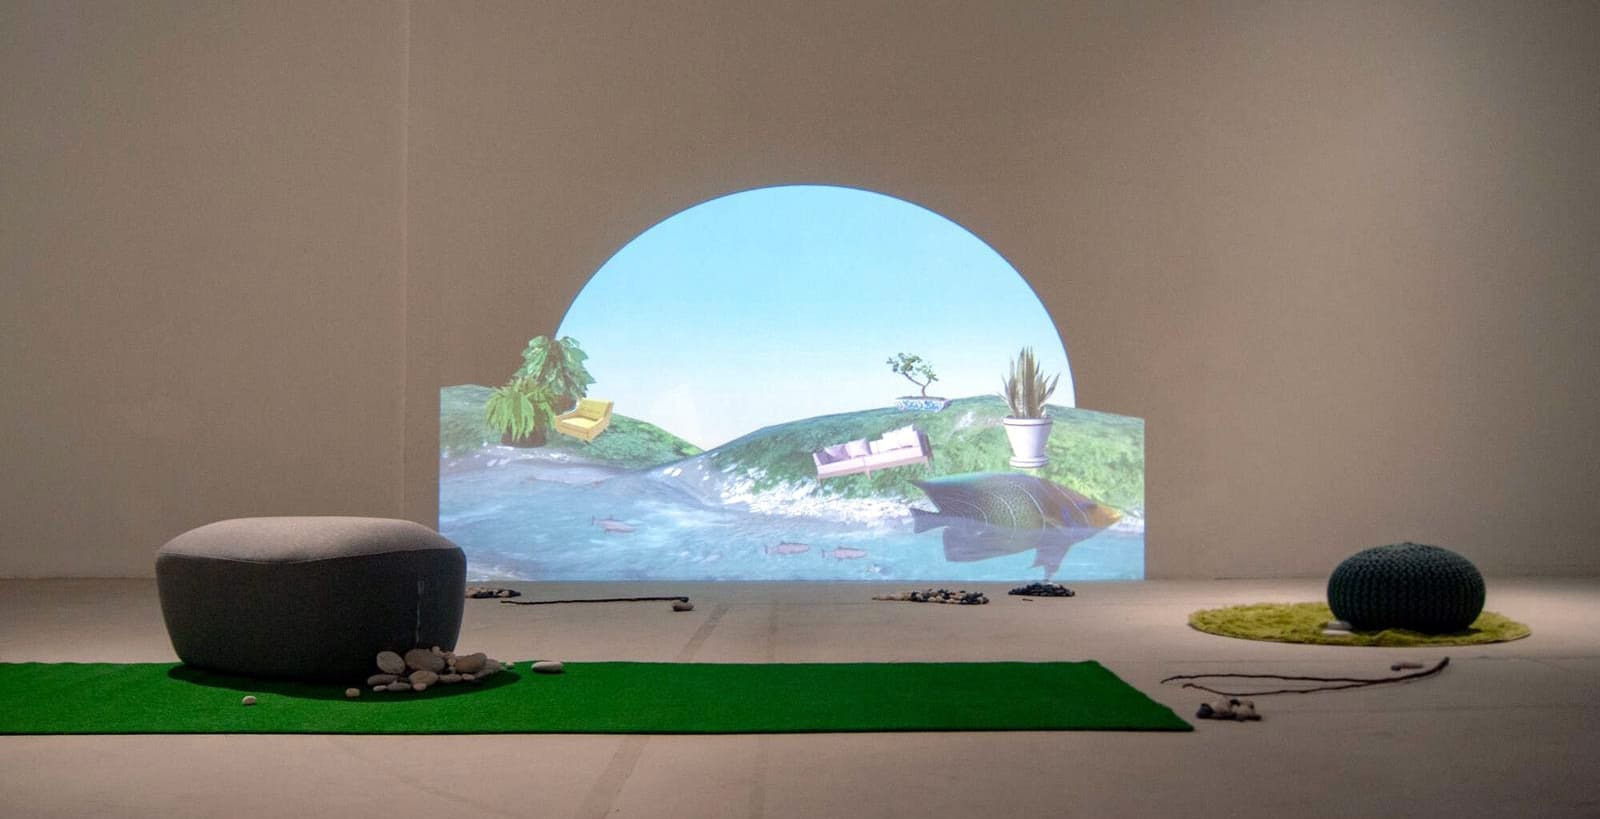 Divaagar's Alive Stream 2.0, an installation that is part of Shifting Between by Our Softest Hour at Blk 9, Gillman Barracks - curated by Millenial artist